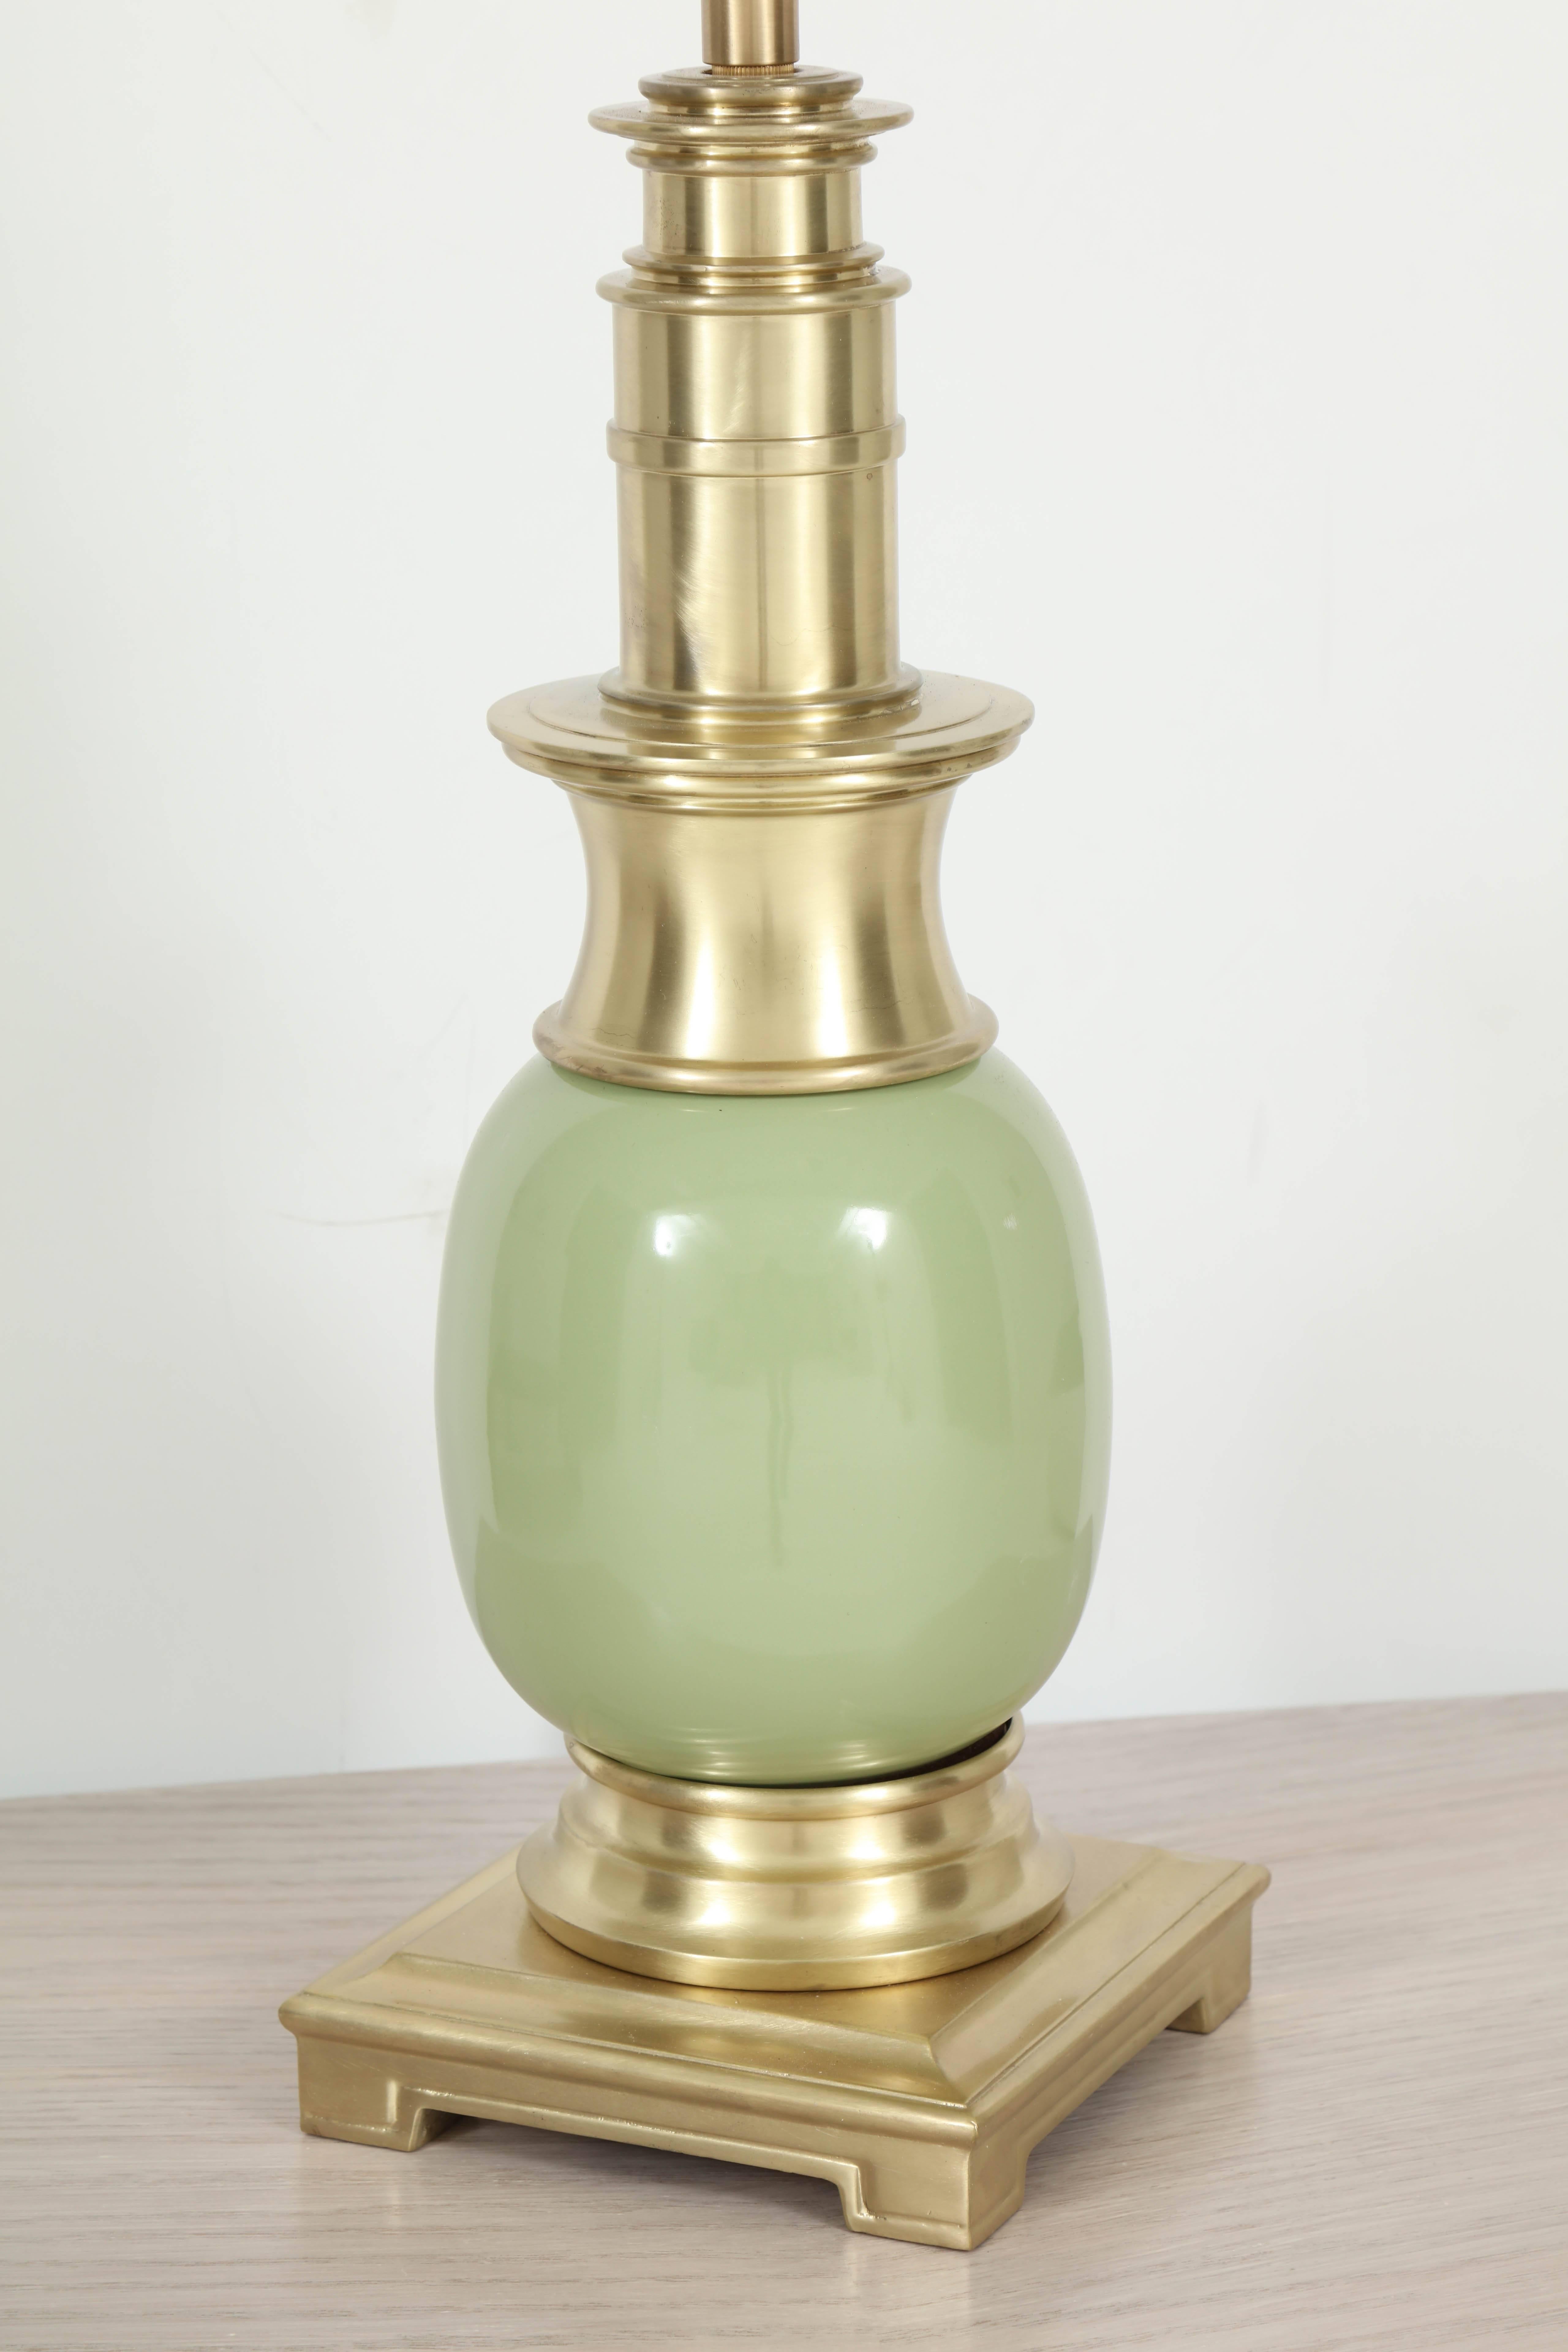 Stiffel Celadon Ceramic Orb and Brass Lamps In Excellent Condition For Sale In New York, NY